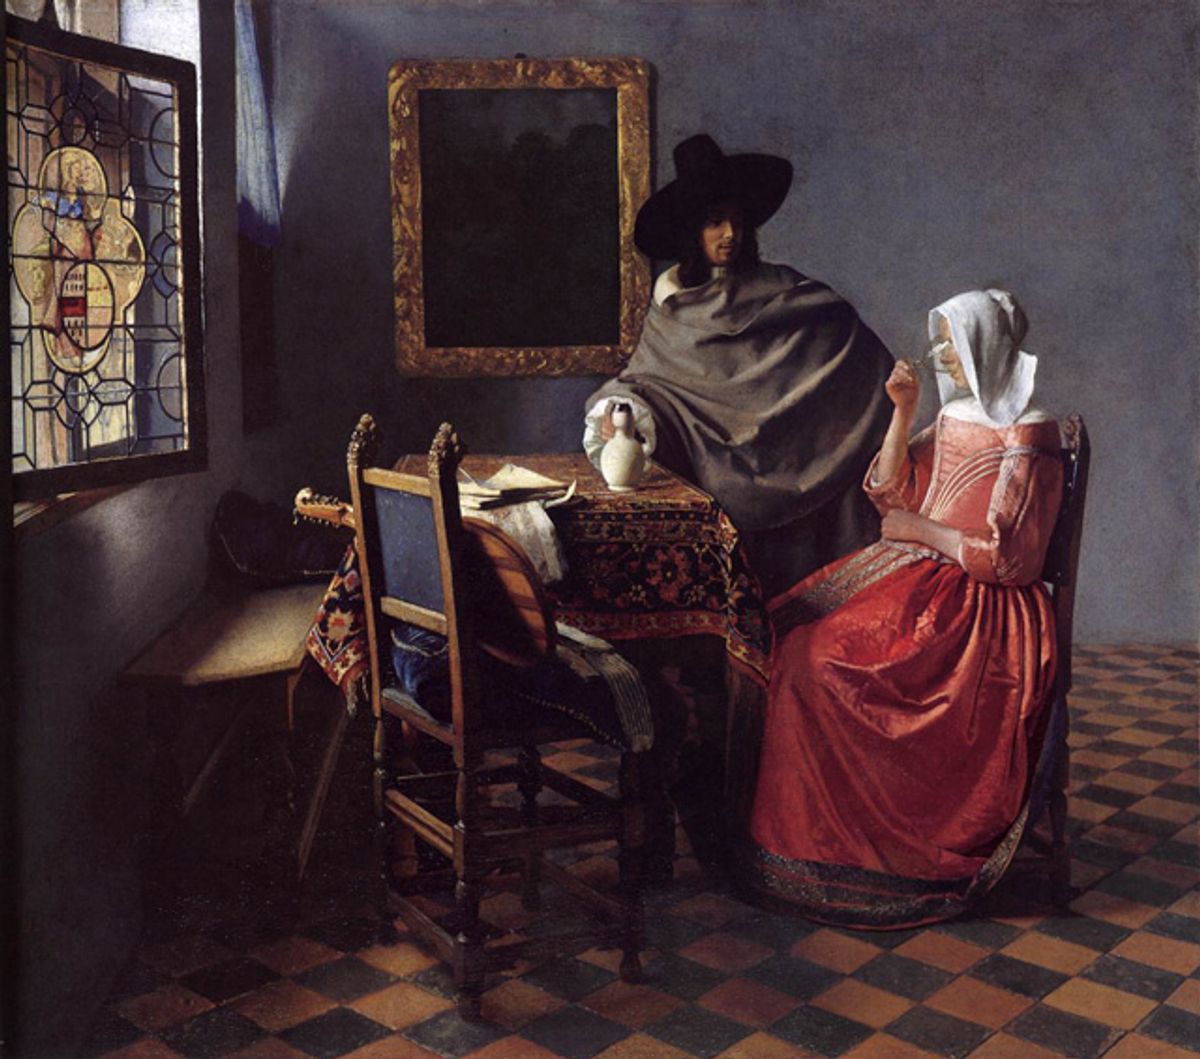  Johannes Vermeer, “A Lady Drinking and a Gentleman” (c. 1658), oil on canvas, 66.3 x 76.5 cm, Staatliche Museen, Berlin   (via Web Gallery of Art)